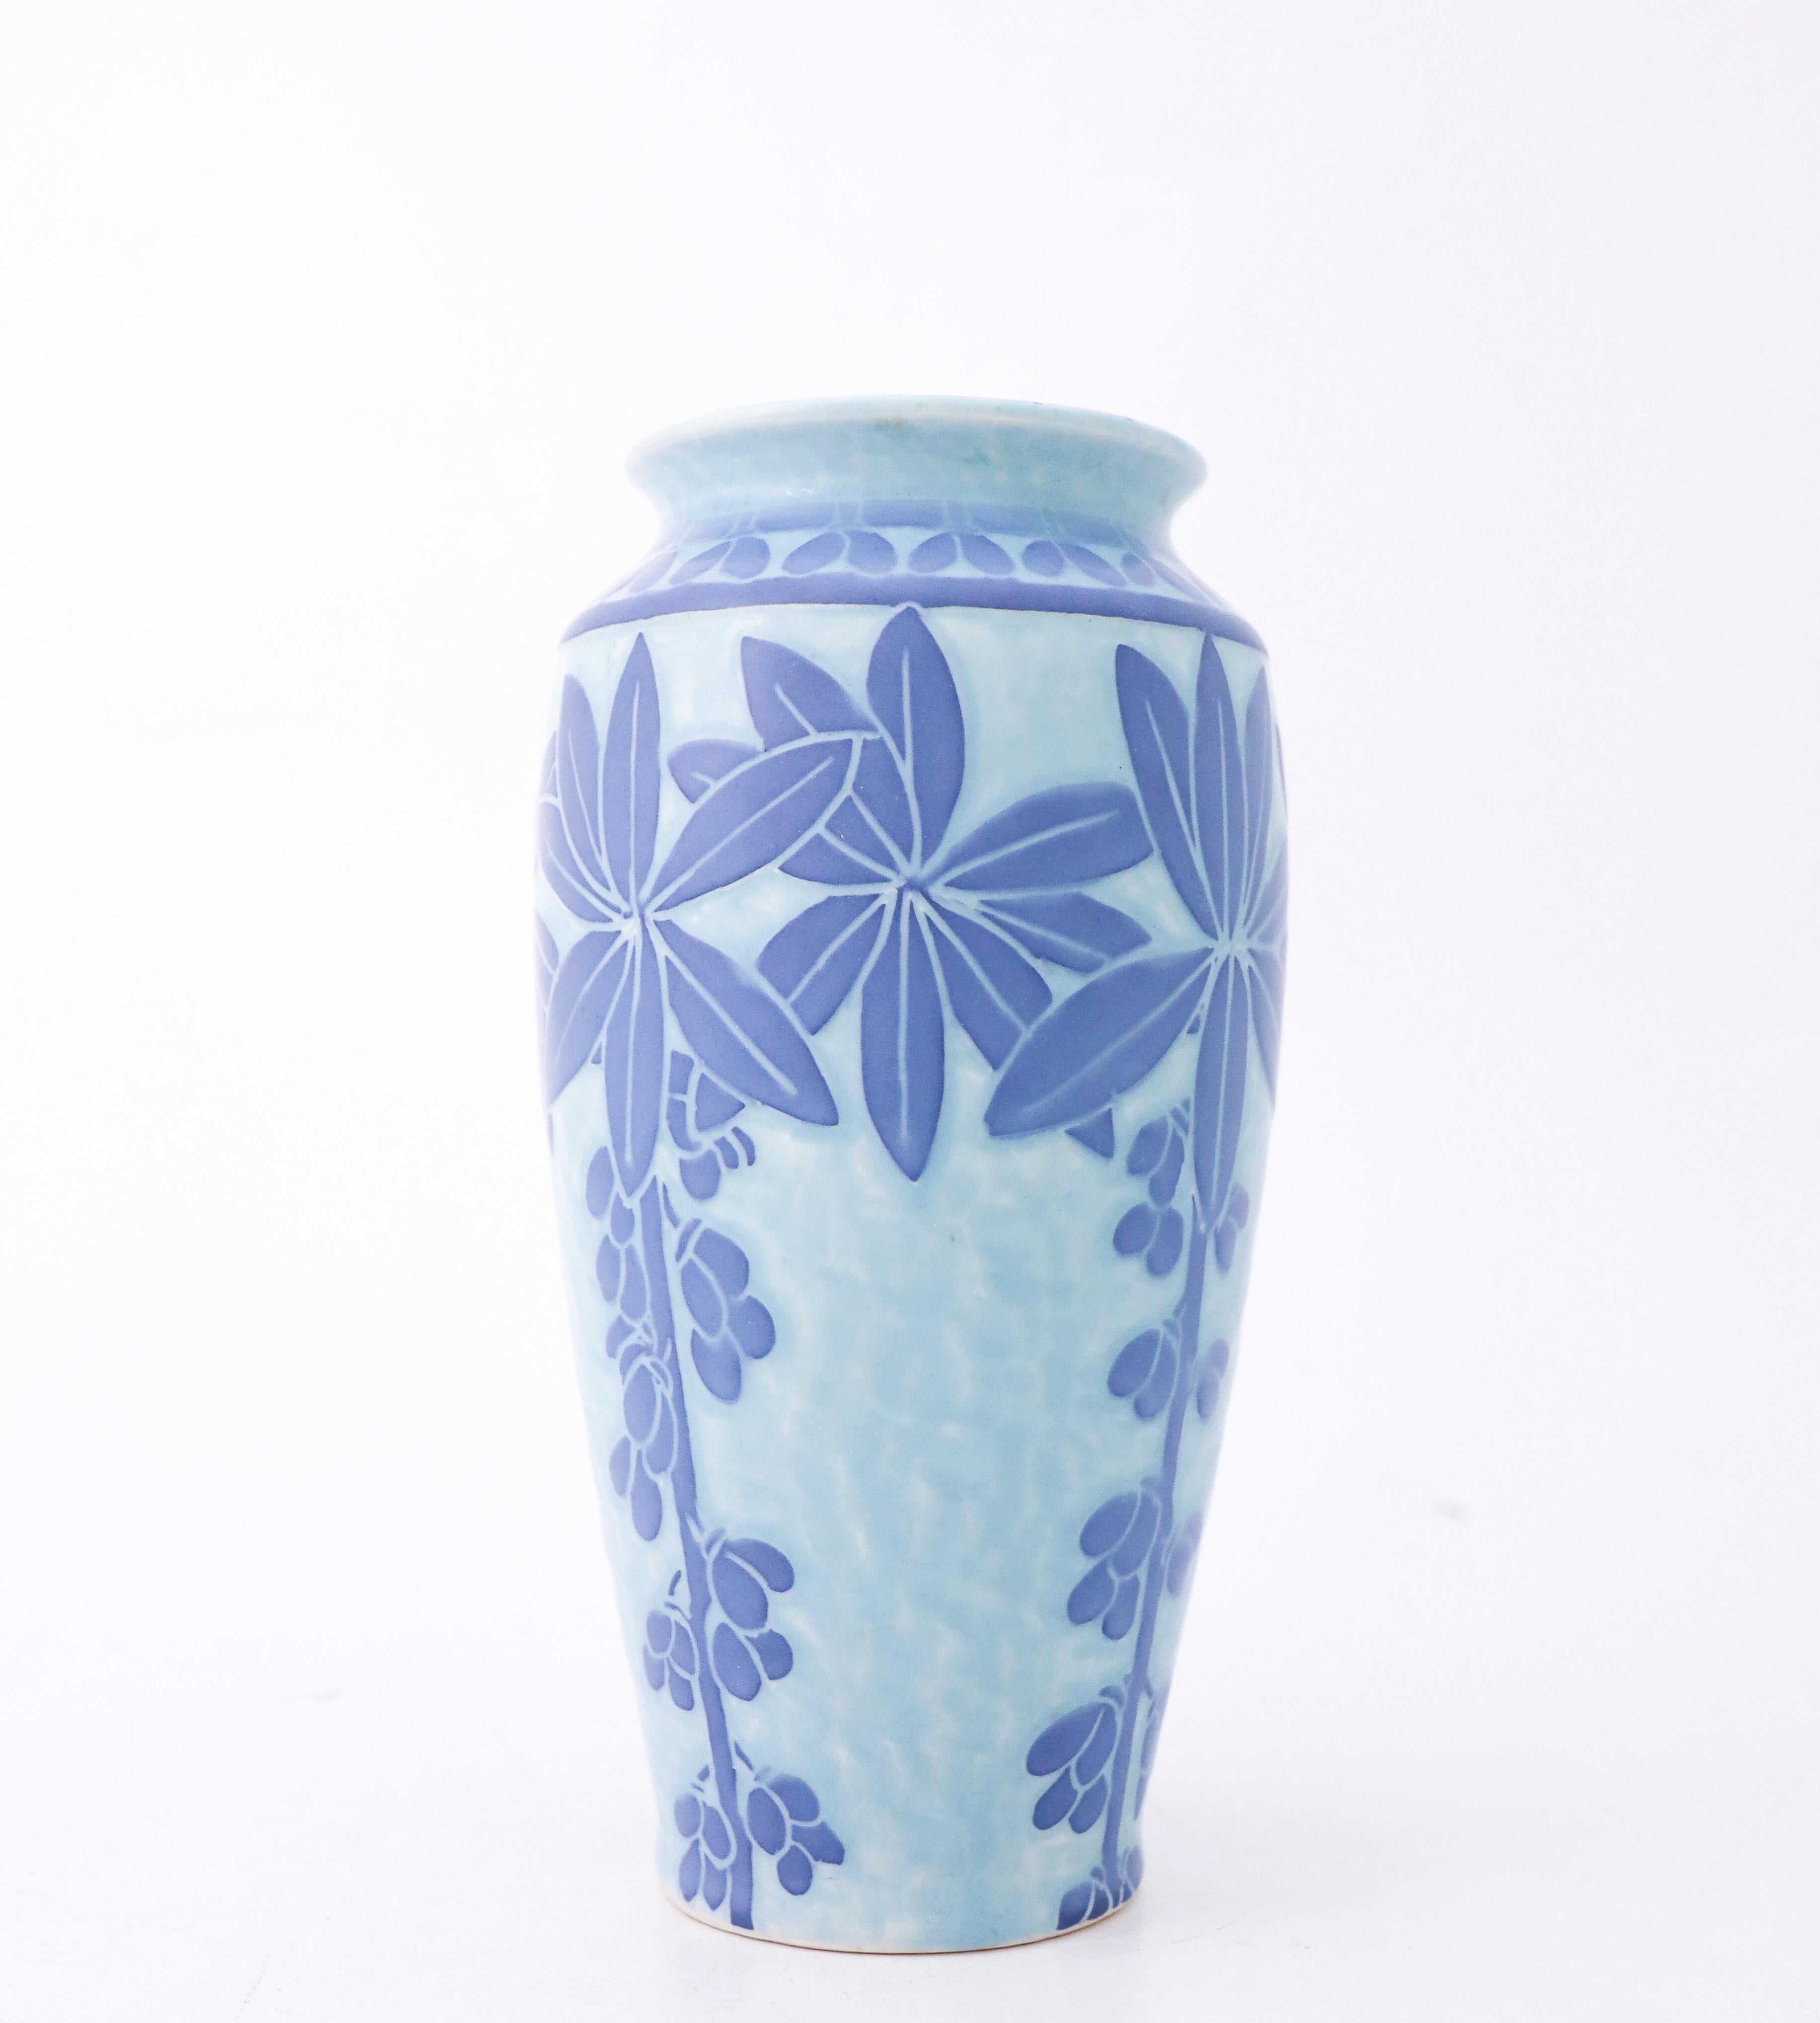 A ceramic vas in lovely art nouveau by Josef Ekberg at Gustavsberg in 1915. The vase is 19 cm high and in excellent condition except from some minor craqueleur because of the age like these vases almost always has.